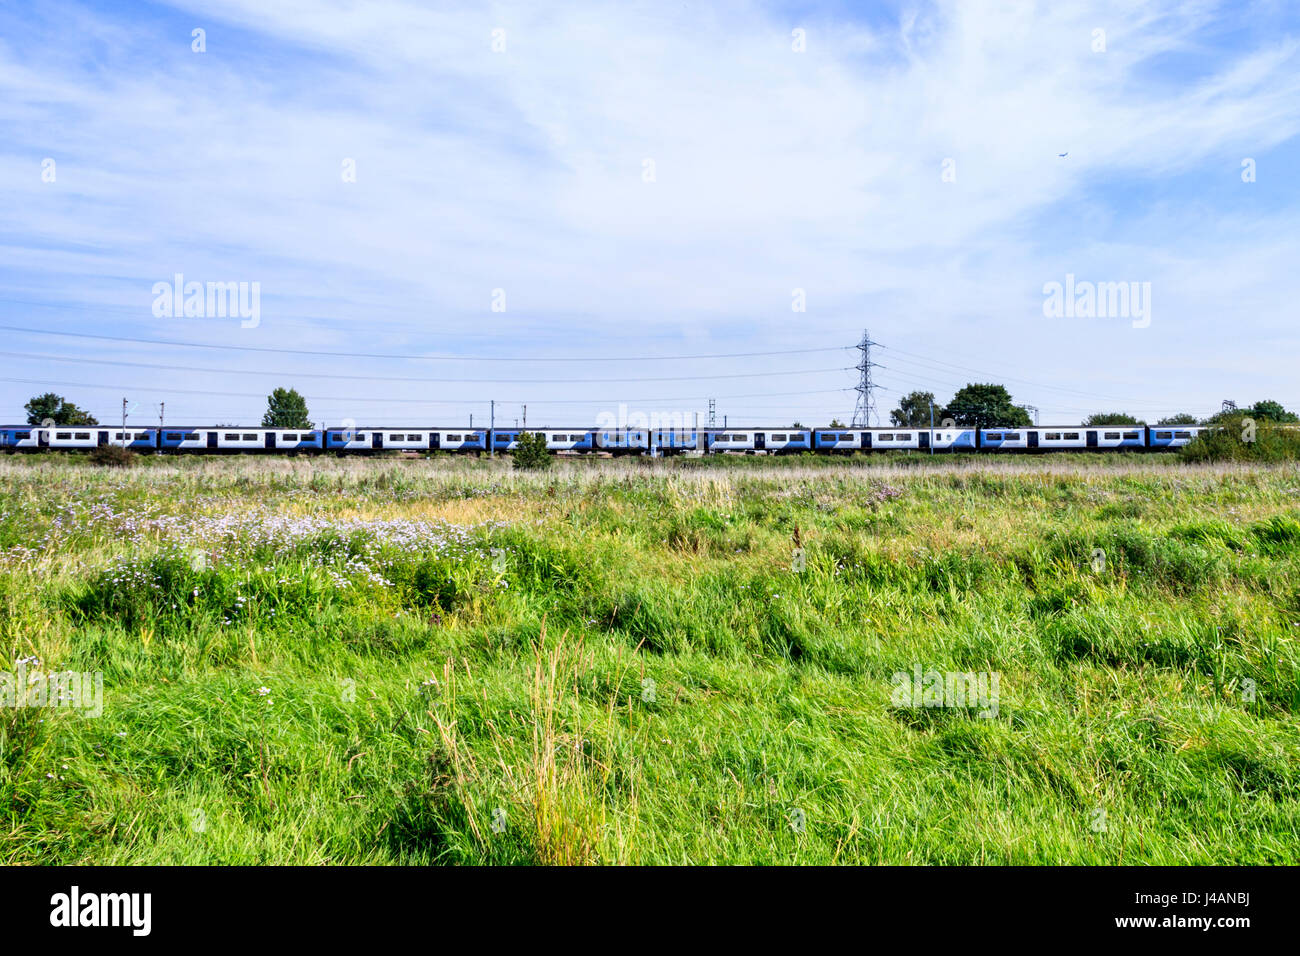 A grassy wild flower meadow on the Walthamstow Marshes, London, UK, a long train on the railway line in the distance Stock Photo